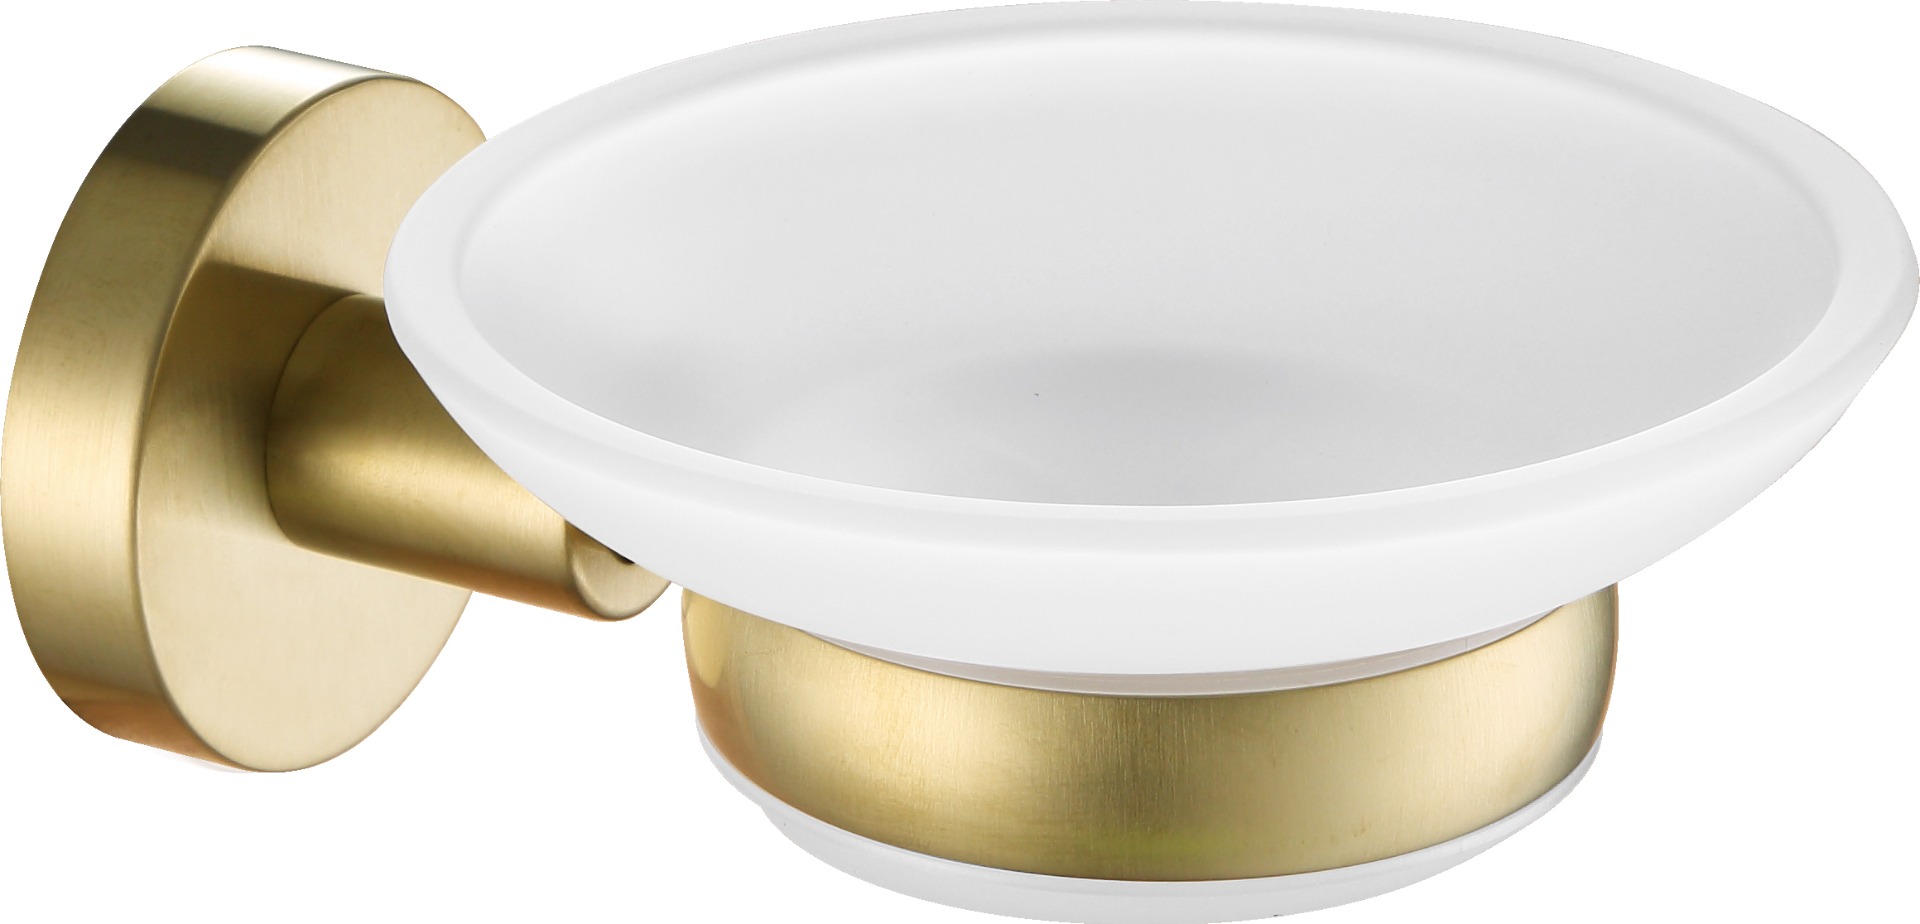 VOS Soap Dish Brushed Brass